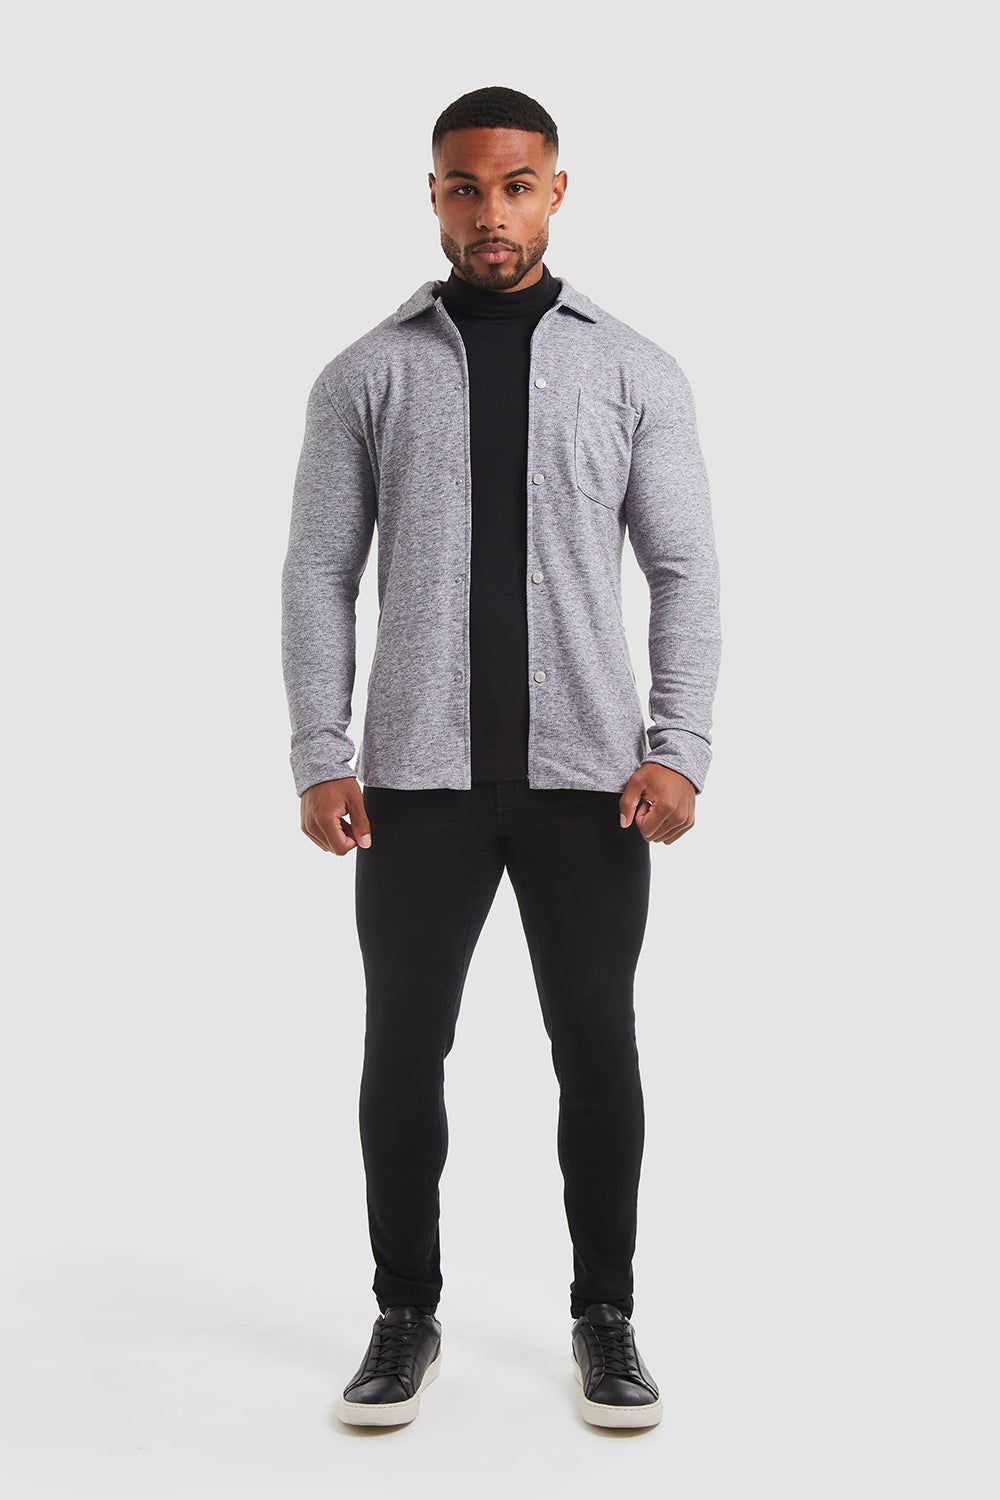 Flannel Overshirt in Pale Grey Marl - TAILORED ATHLETE - ROW